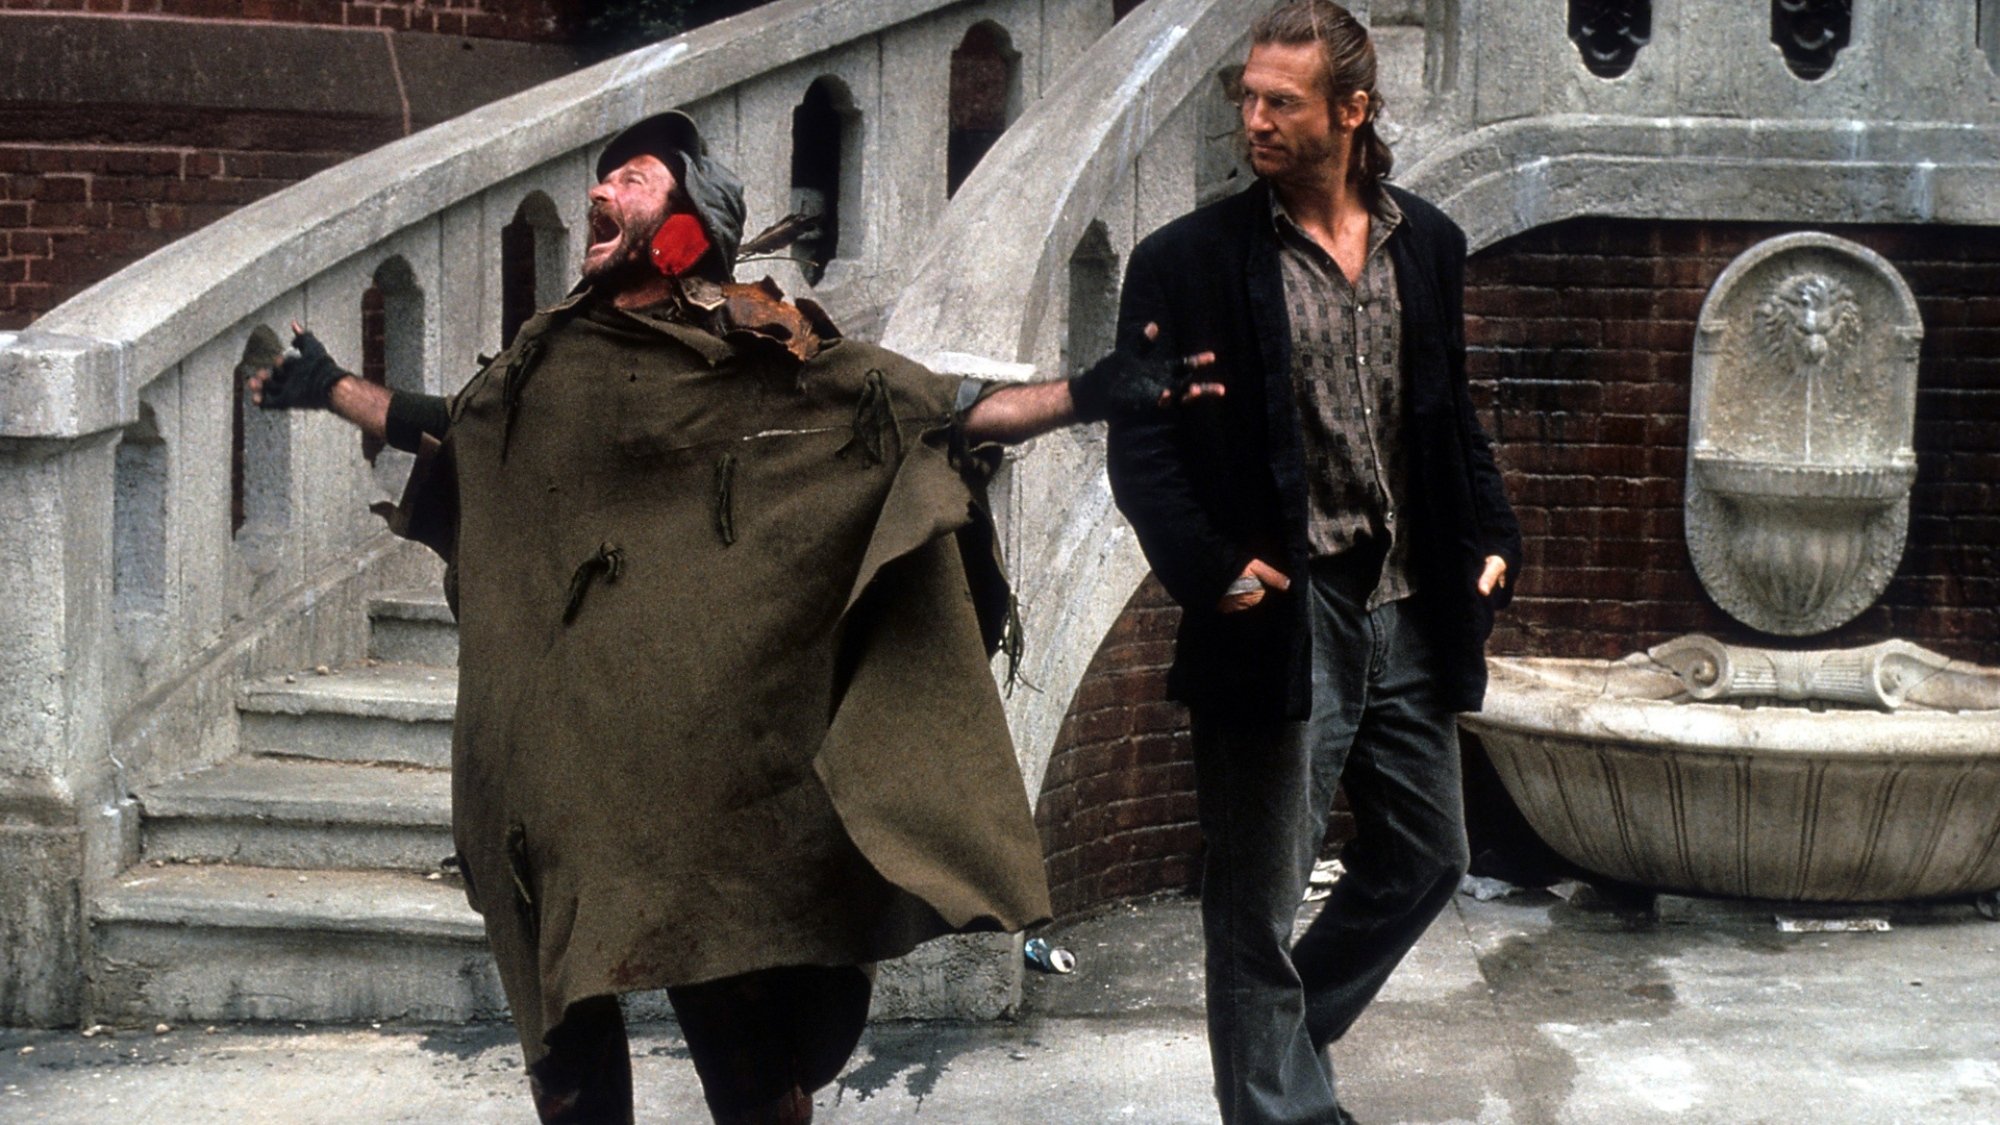 Robin Williams and Jeff Bridges in "The Fisher King."